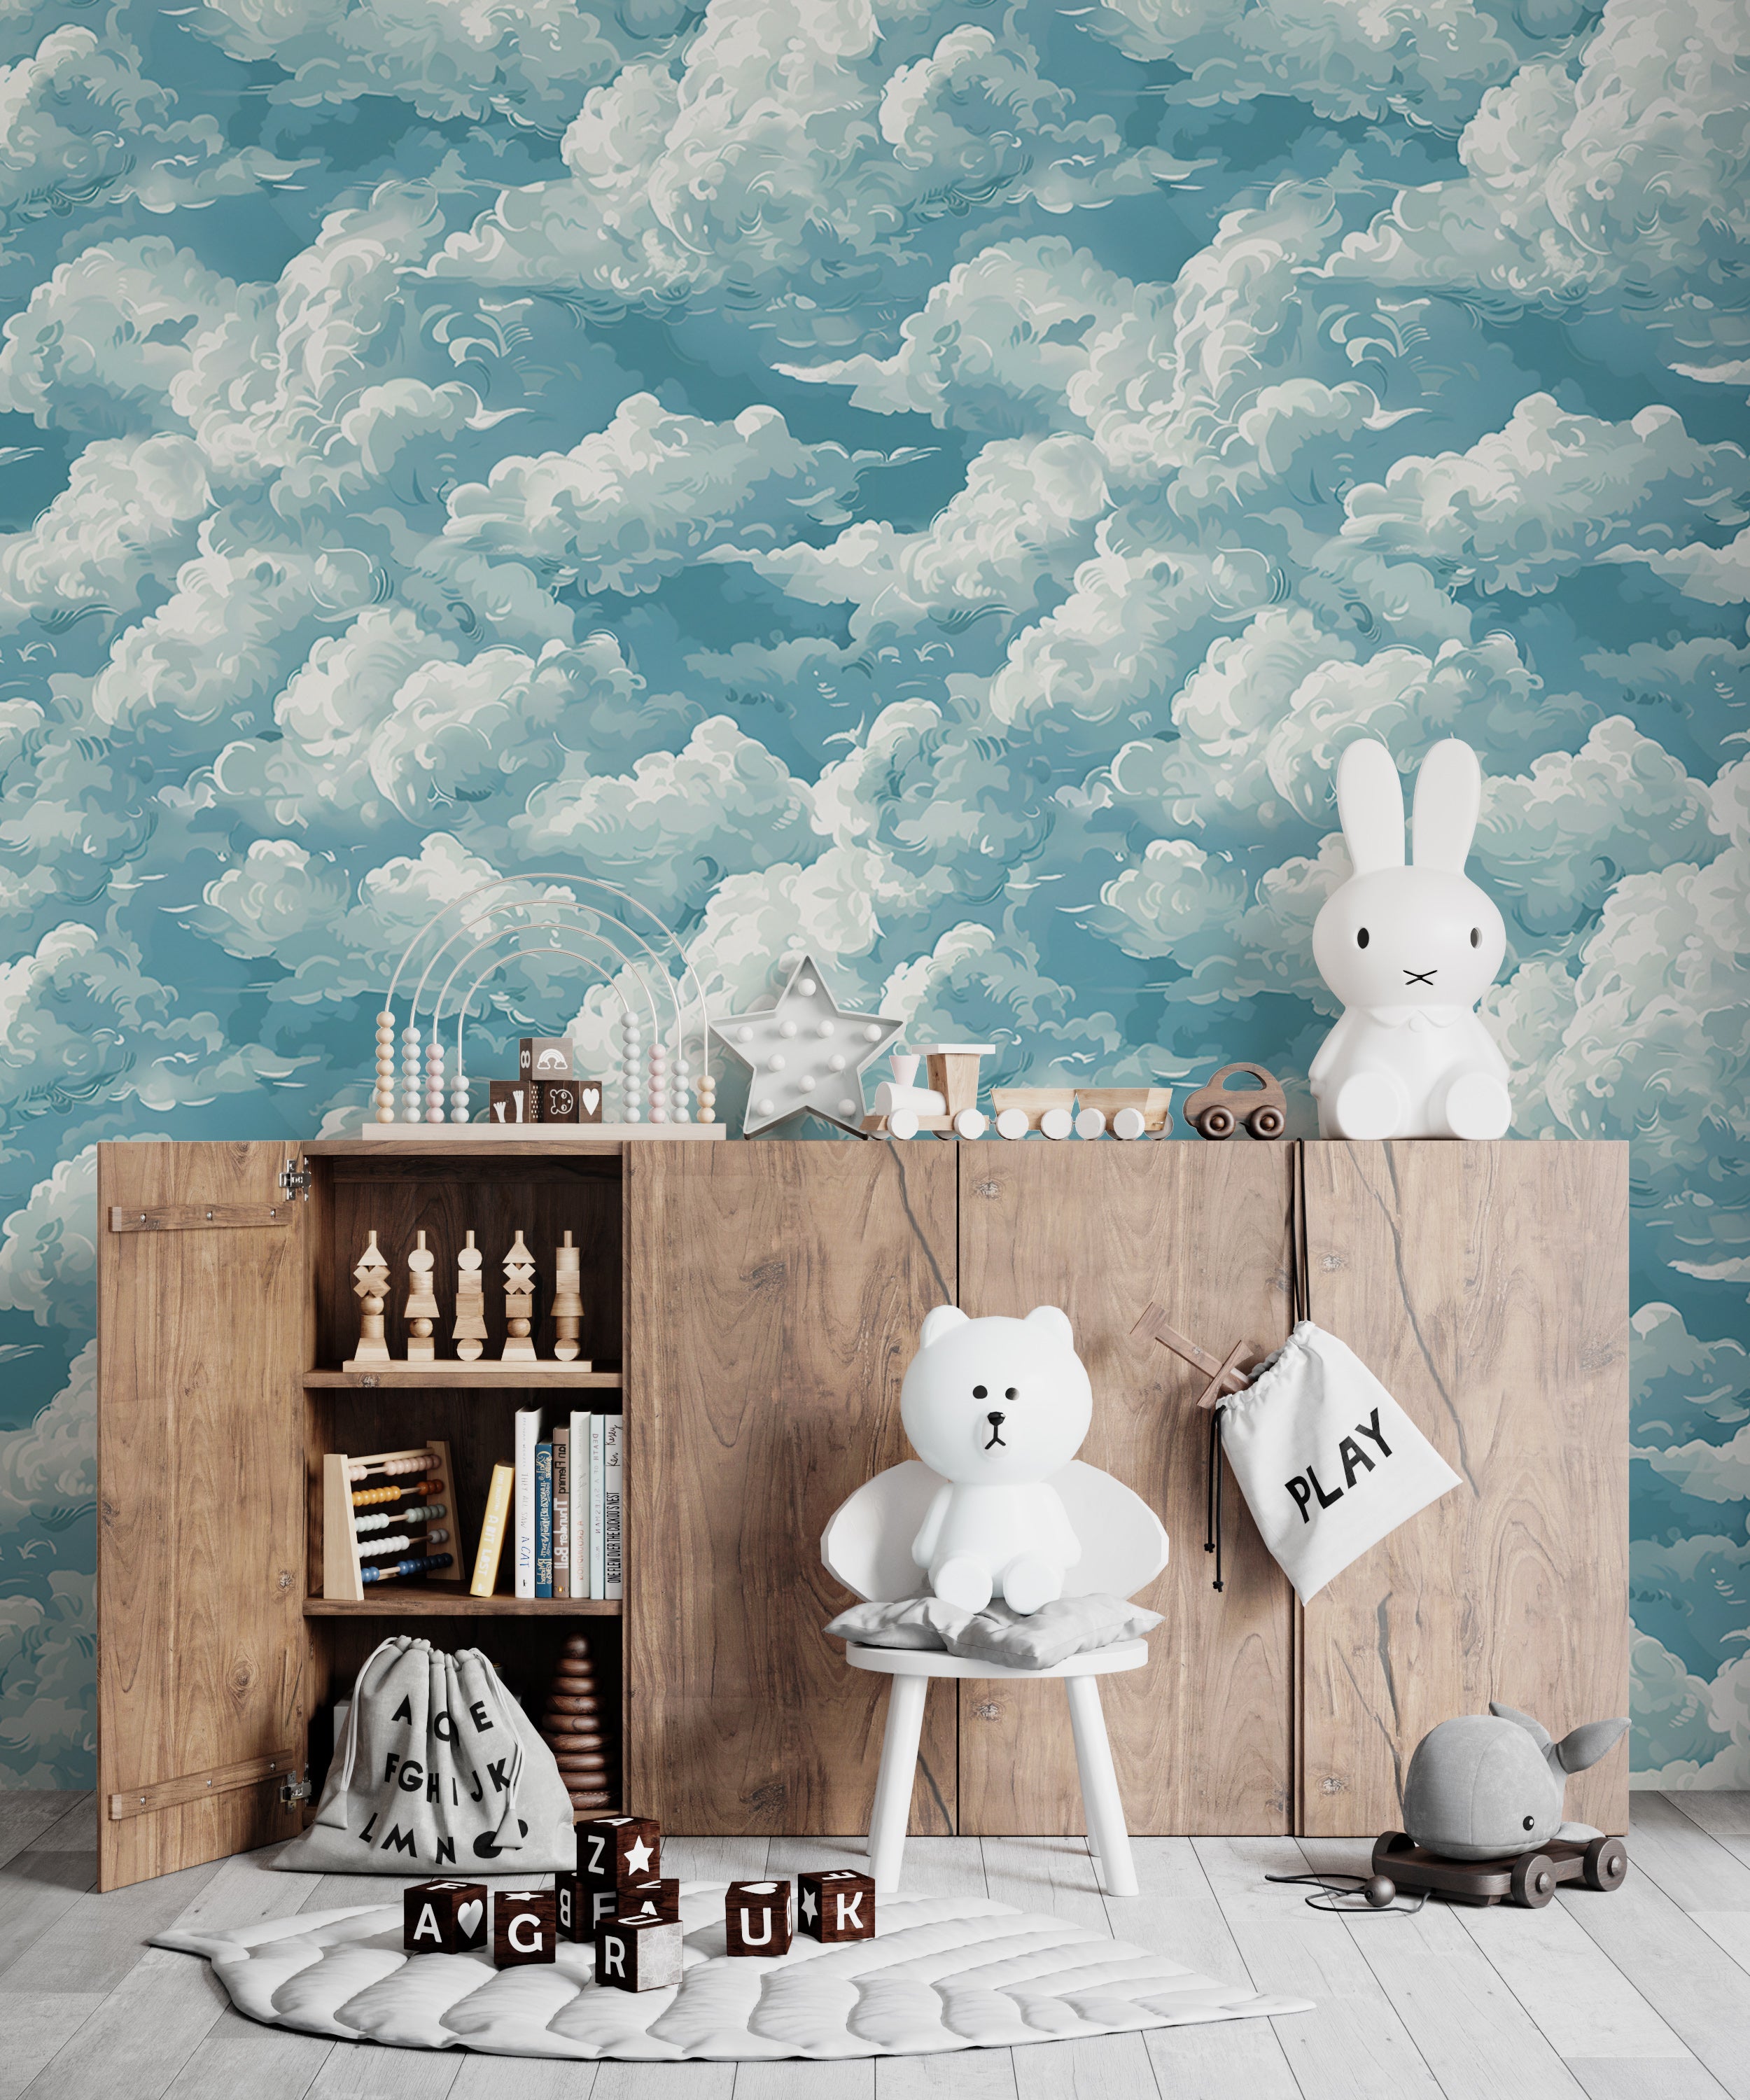 Blue and White Clouds Wallpaper, Watercolor Cloud Pattern Wall Decor, Peel and Stick Nursery Fluffy Clouds Wallpaper